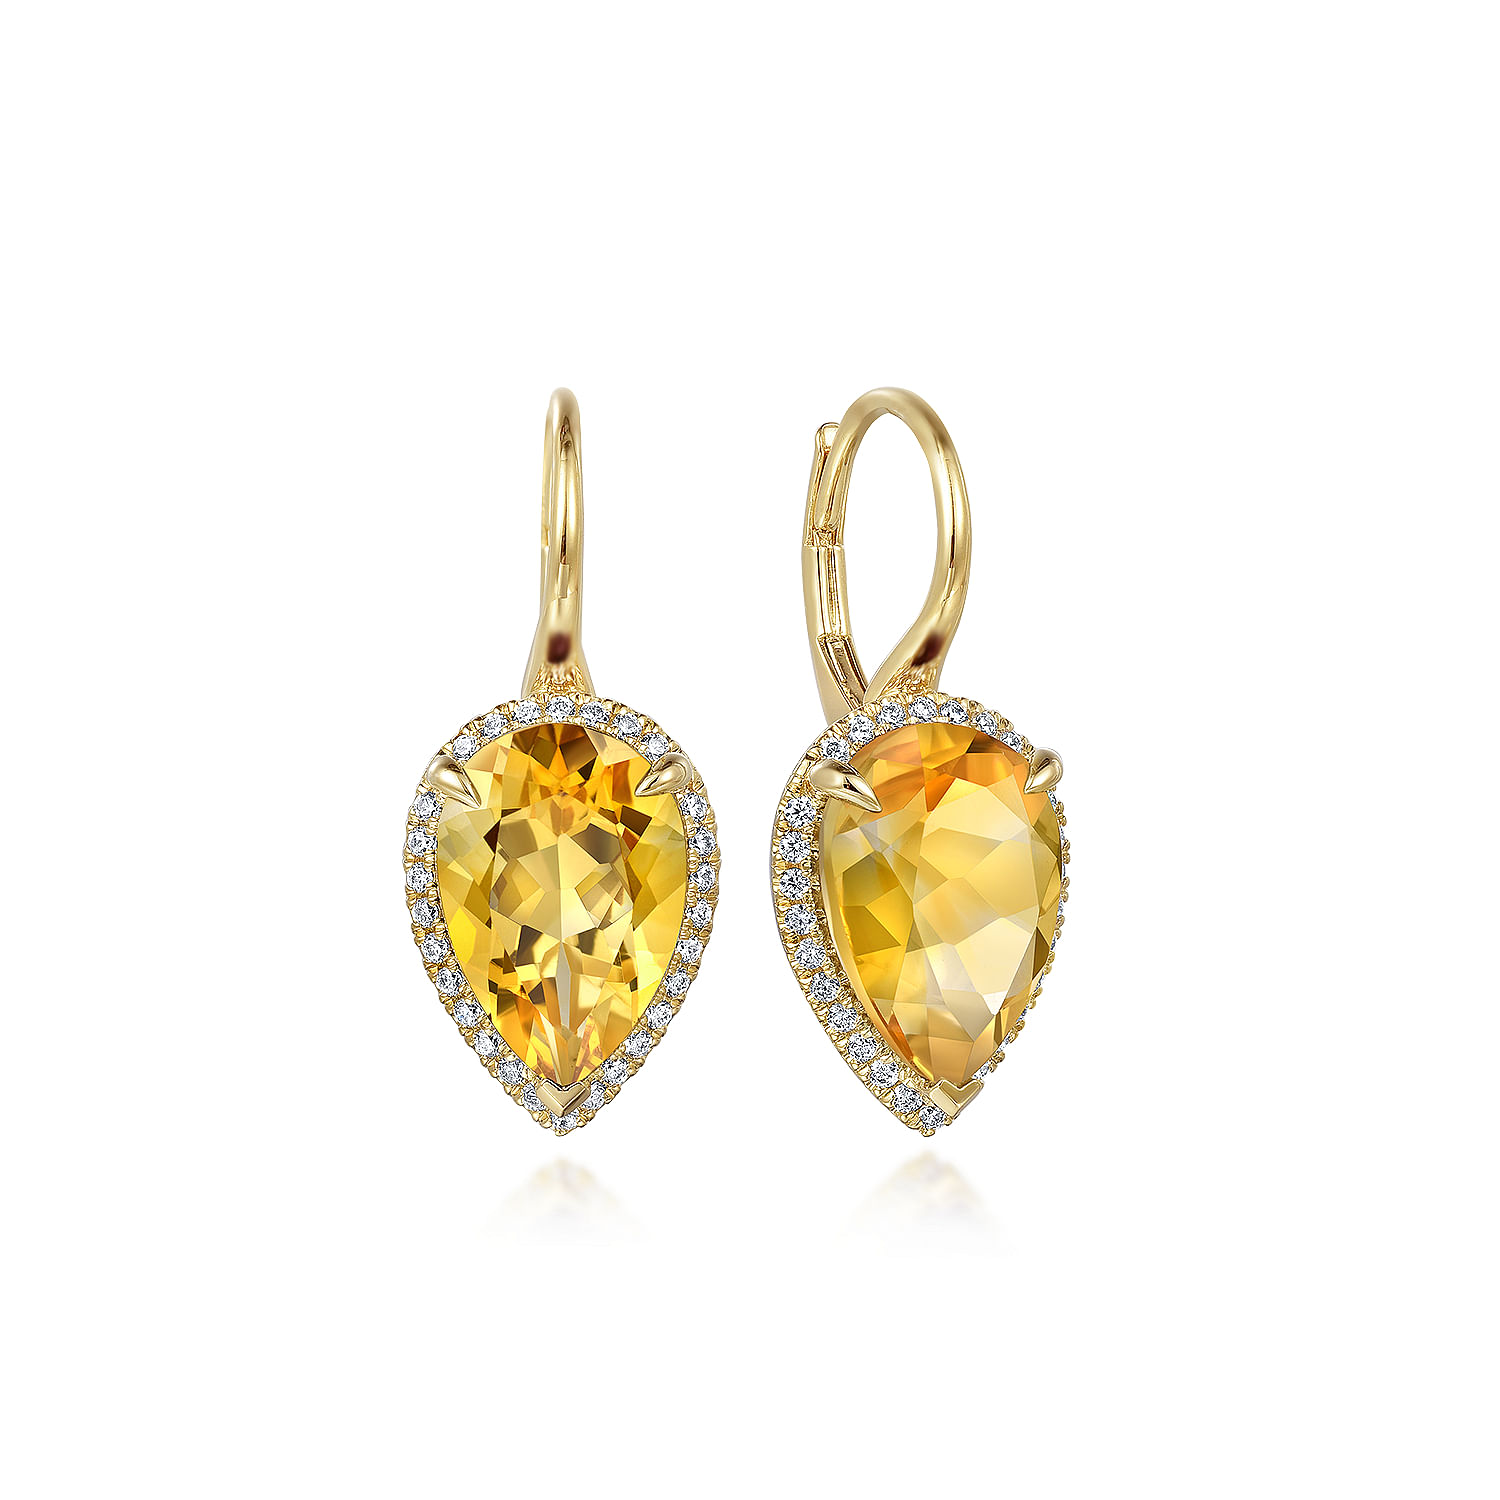 14K Yellow Gold Diamond and Flat Pear Citrine Earrings With Flower Pattern J-Back